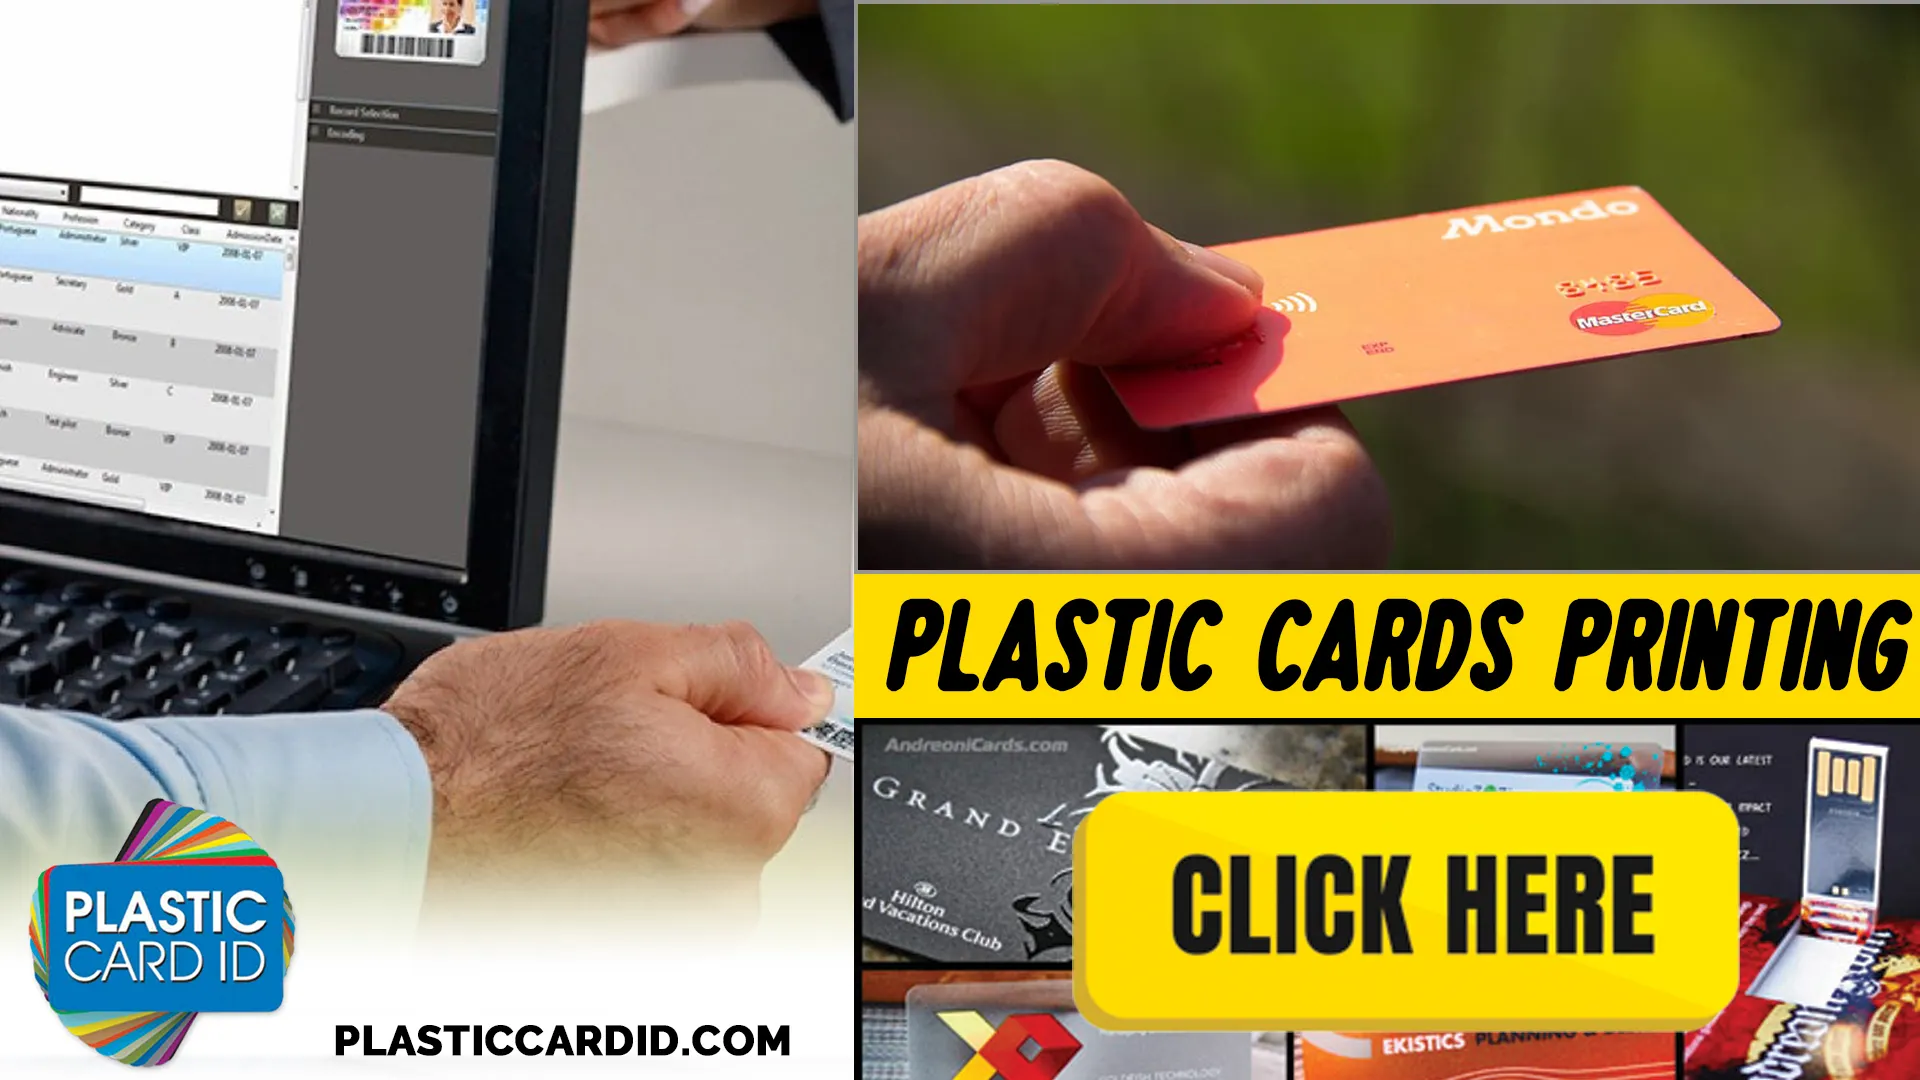 The Ease of Use Factor: Making Printing Intuitive with Plastic Card ID
